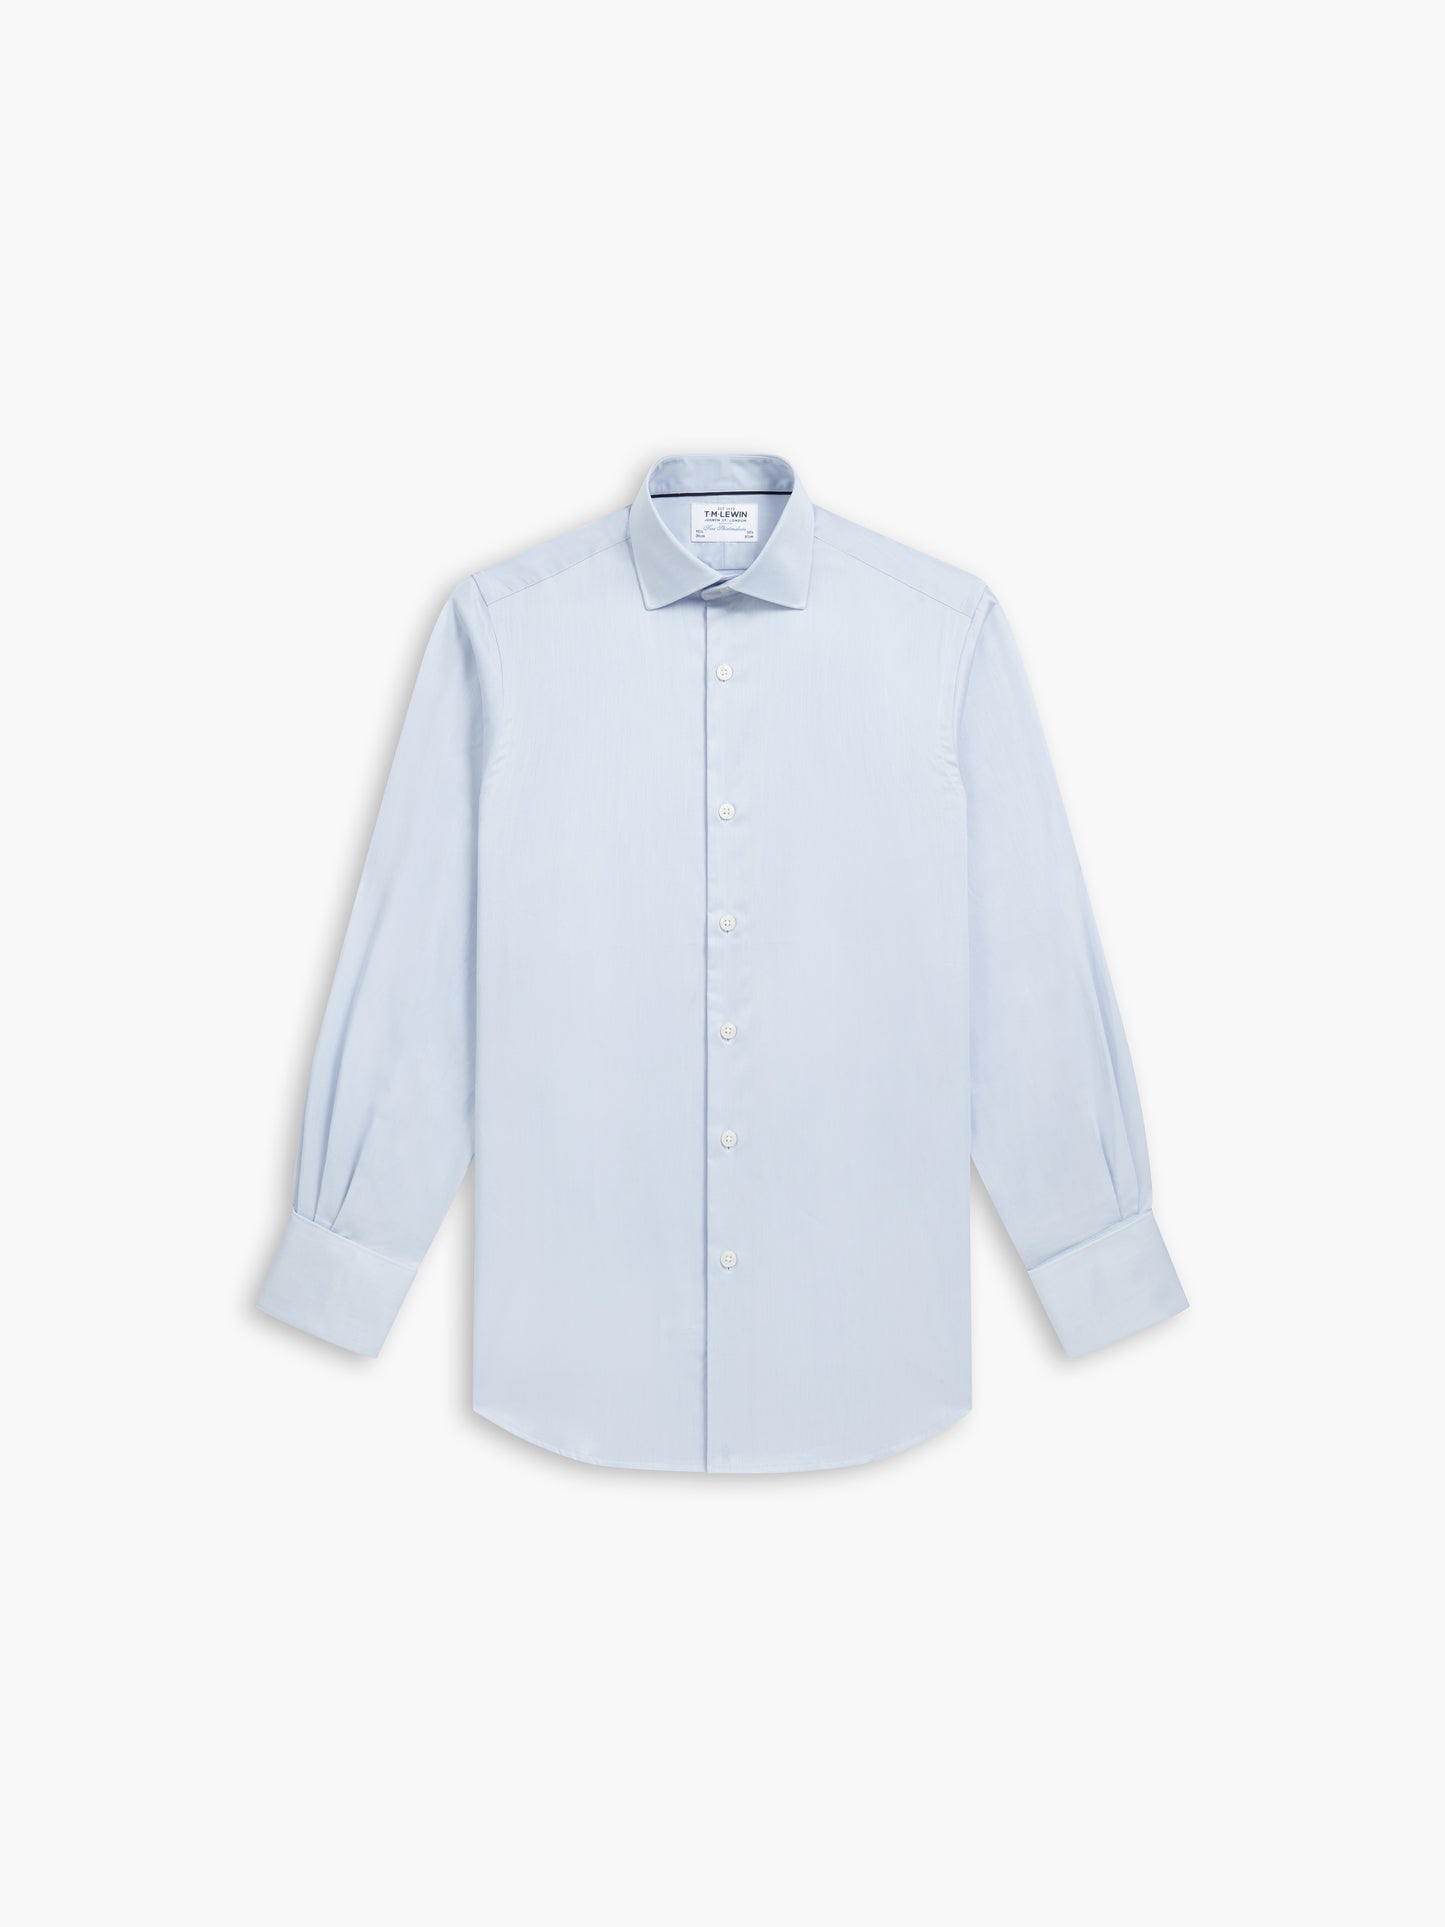 Light Blue Stretch Twill Fitted Double Cuff Classic Collar Shirt